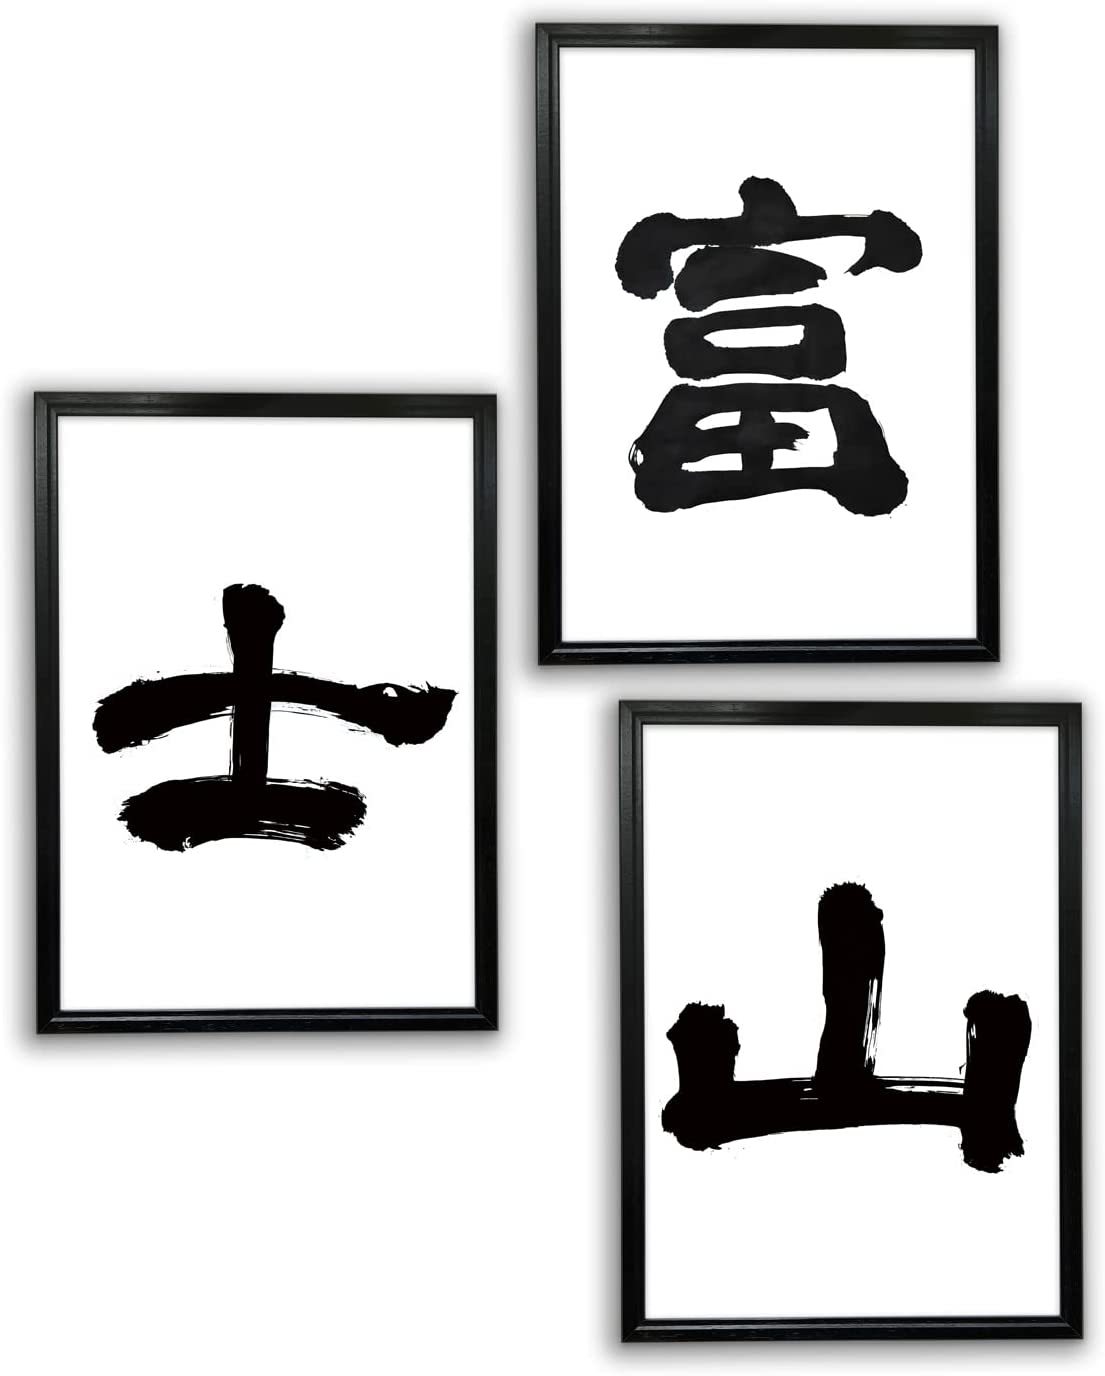 Japanese Calligraphy “Kanji Art Wall Art Japanese Paper Print Poster Made in Japan, Size A3,11.69 inch x 16.54 inch, Unframed FORTUNA Tokyo